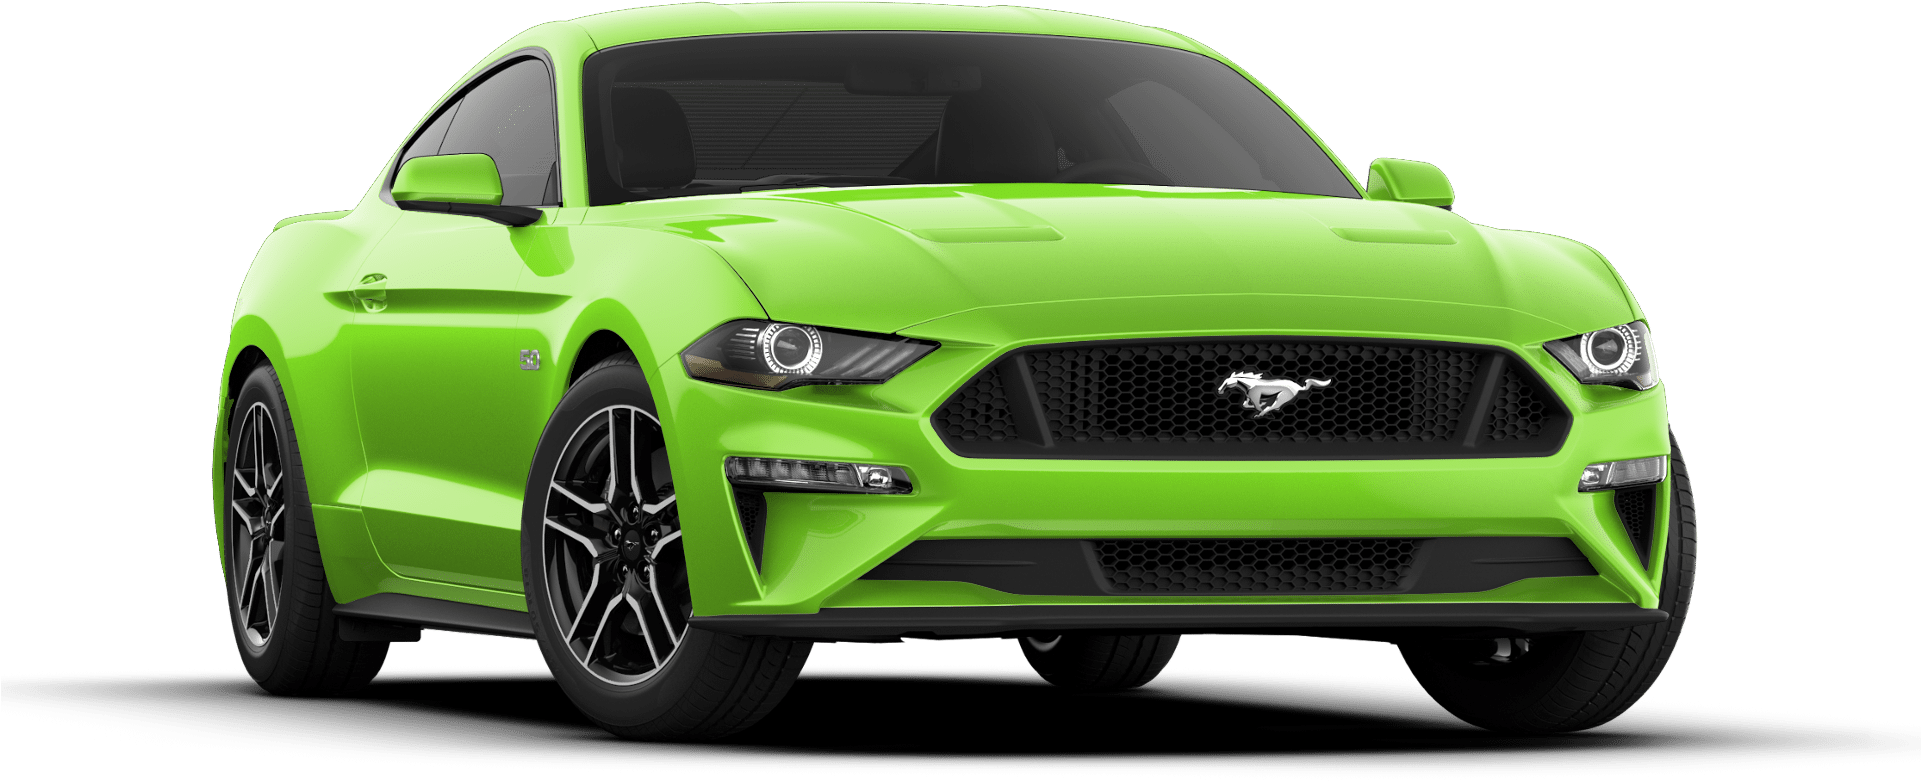 Bright Green Ford Mustang Profile View